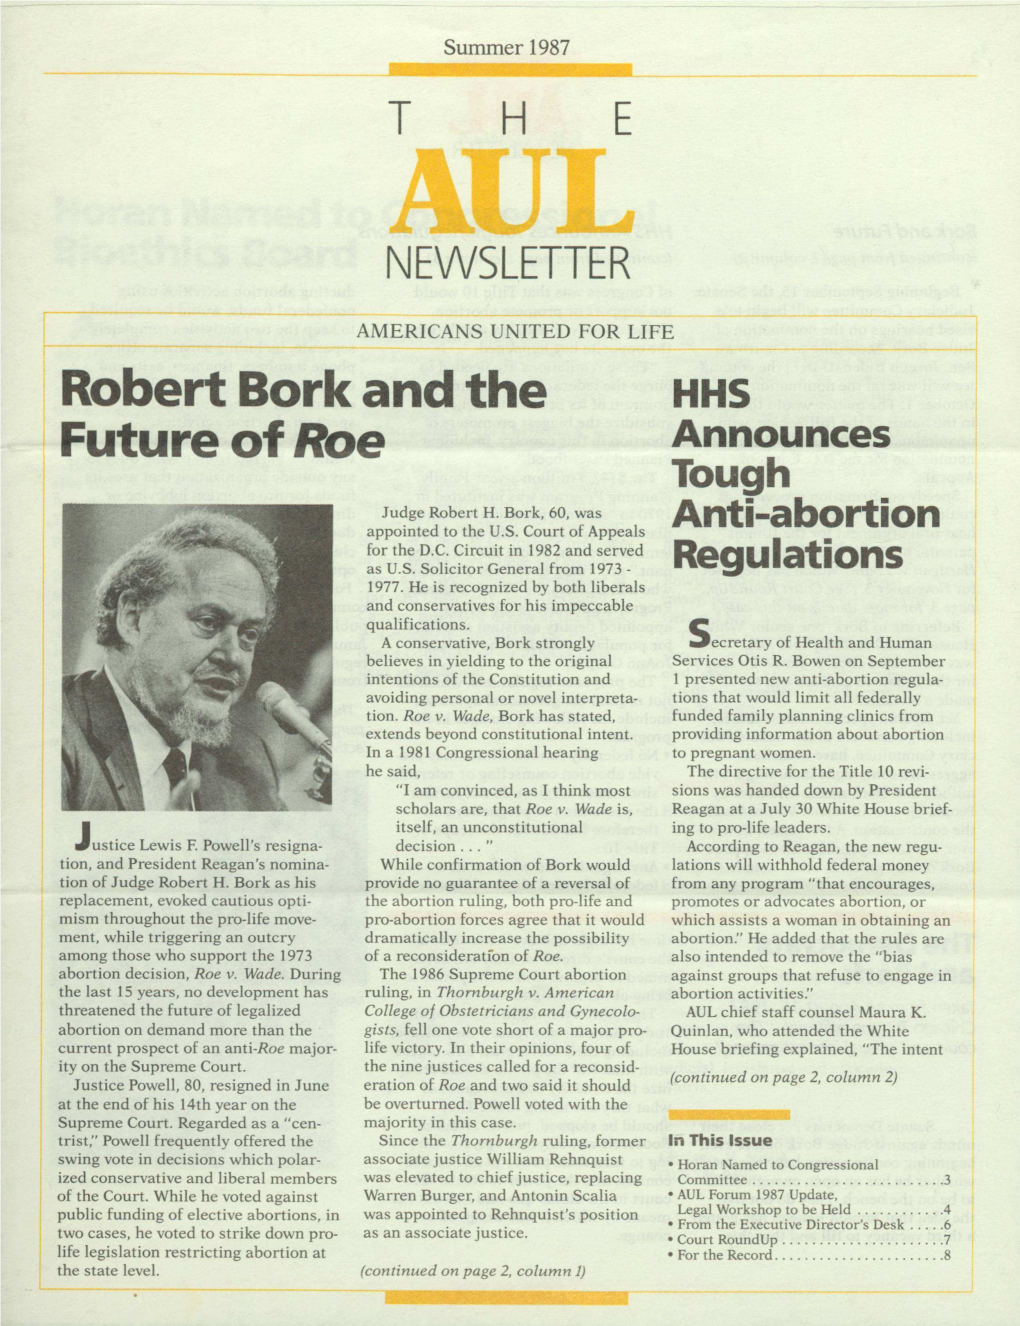 NEWSLETTERAUL AMERICANS UNITED for LIFE Robert Bork and the HHS Future O F Roe a Nnounces Tough Judge Robert H